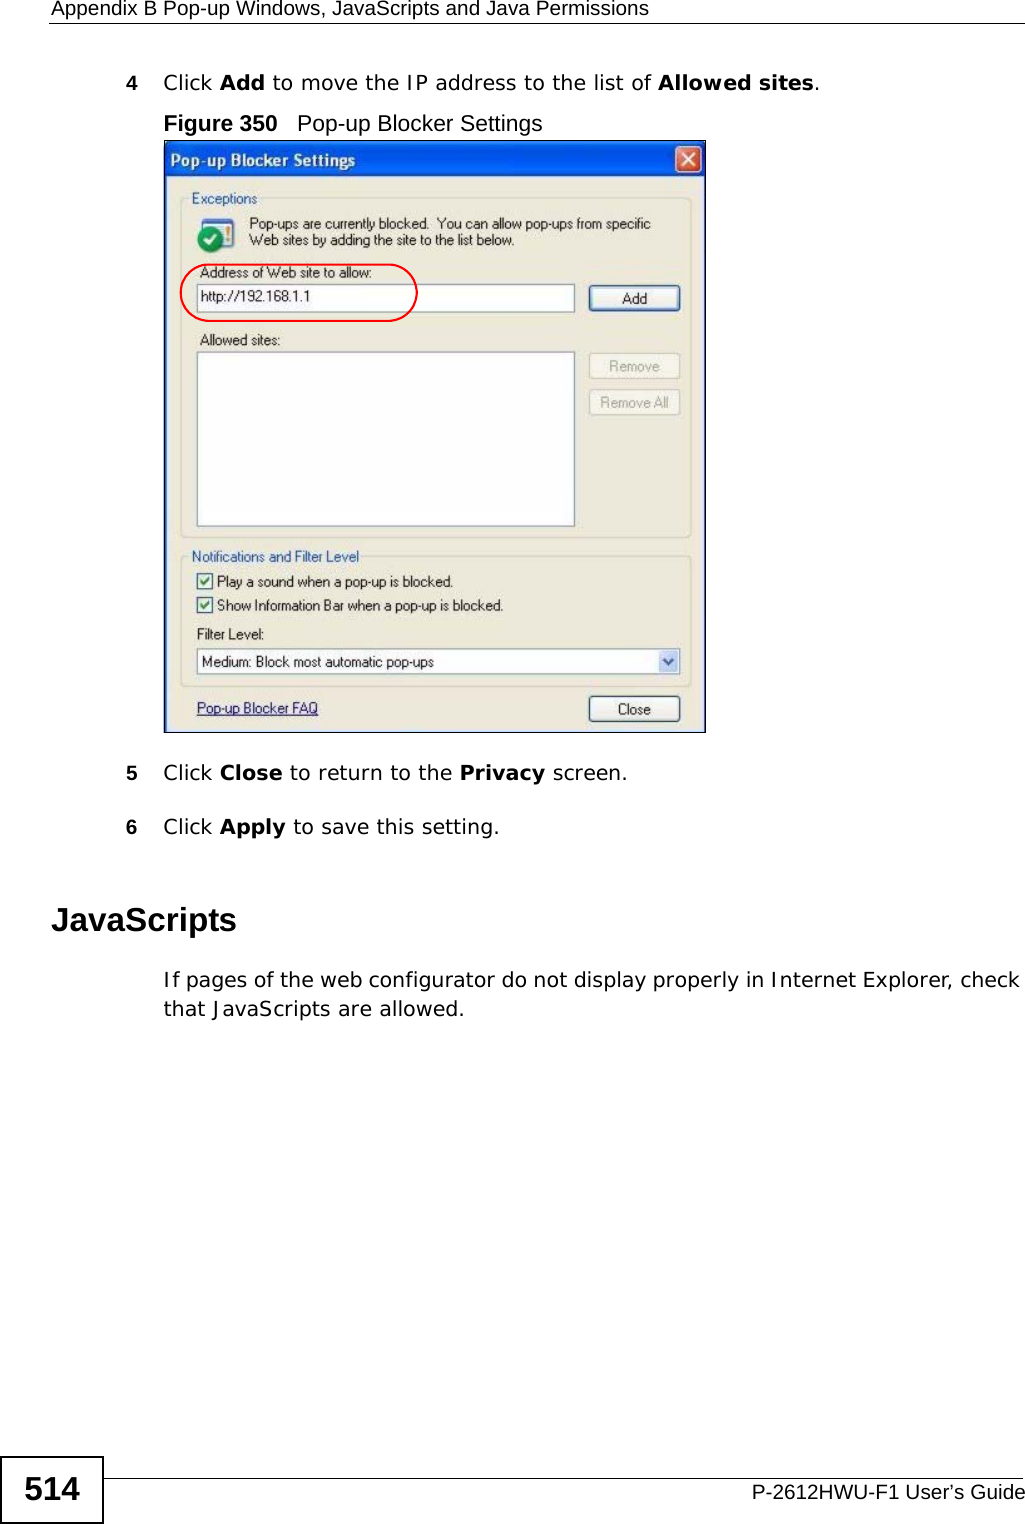 Appendix B Pop-up Windows, JavaScripts and Java PermissionsP-2612HWU-F1 User’s Guide5144Click Add to move the IP address to the list of Allowed sites.Figure 350   Pop-up Blocker Settings5Click Close to return to the Privacy screen. 6Click Apply to save this setting. JavaScriptsIf pages of the web configurator do not display properly in Internet Explorer, check that JavaScripts are allowed. 